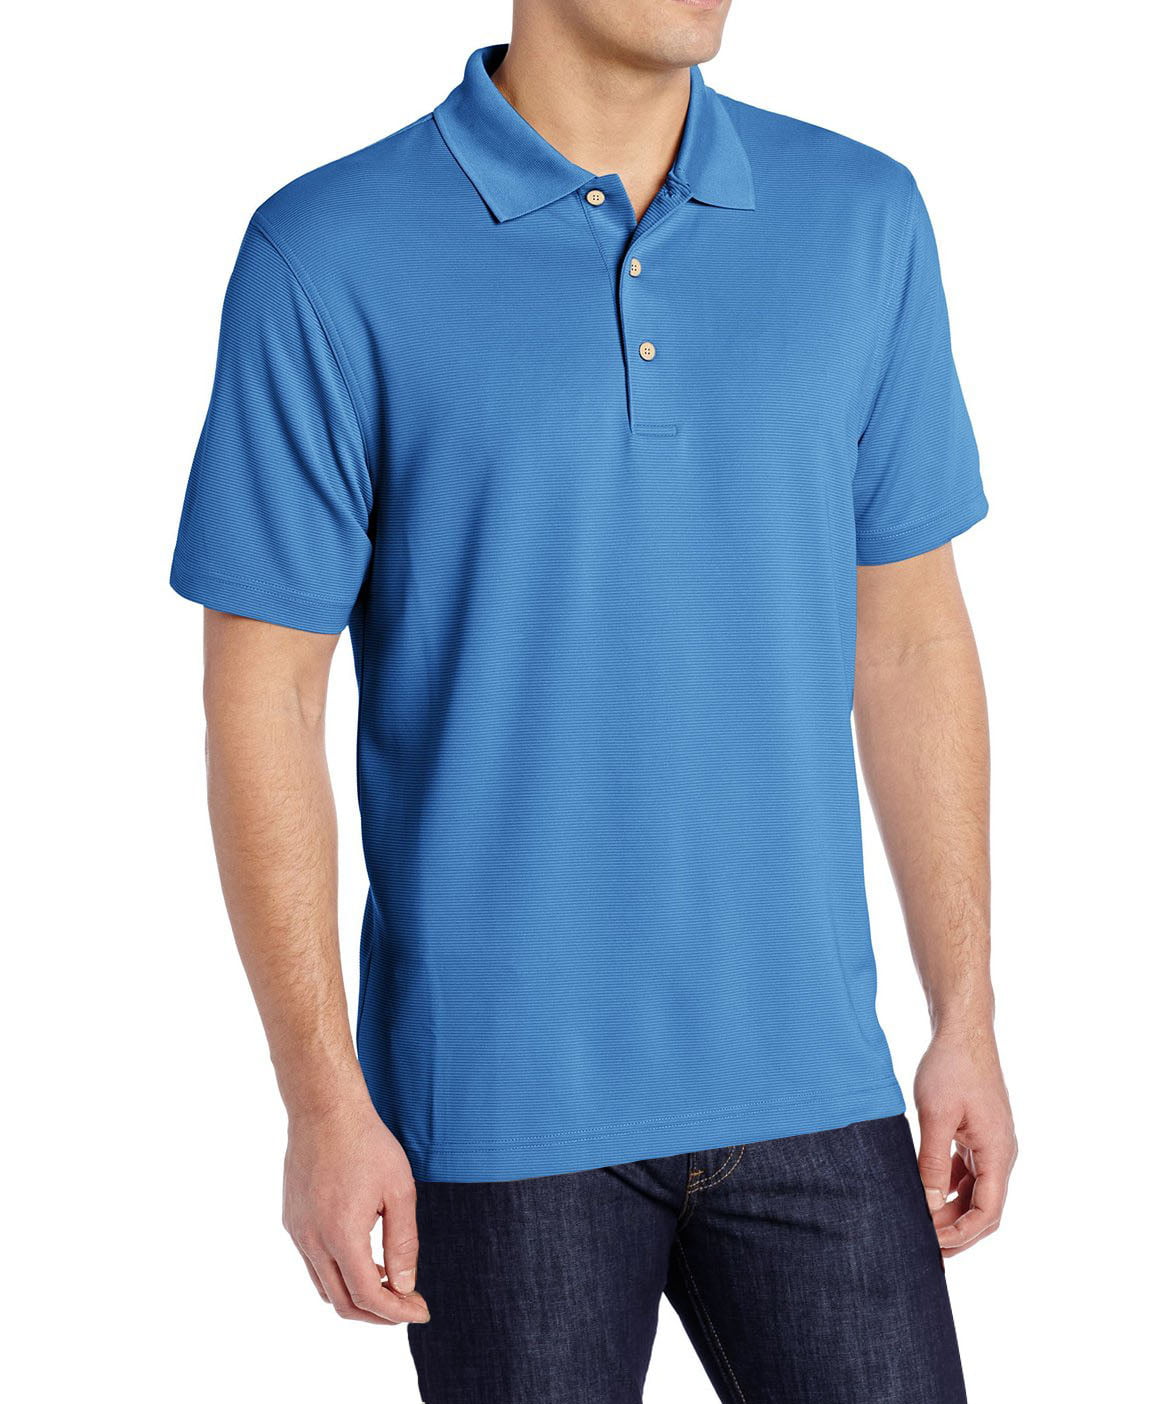 Cubavera Mens Big and Tall Essential Textured Performance Polo